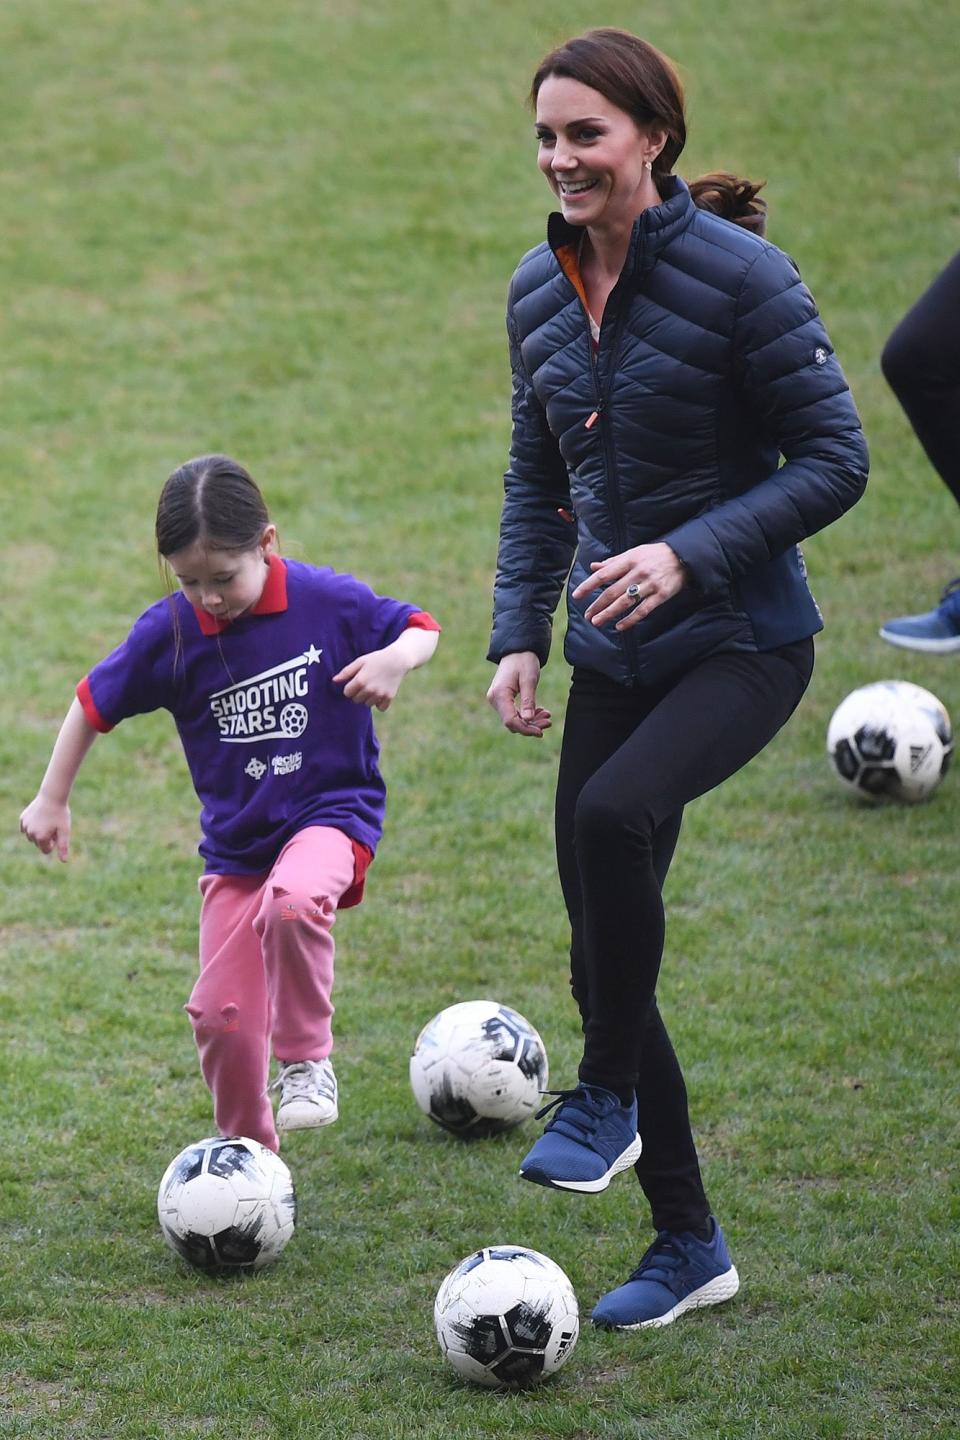 During a Feb. 2019 visit to Northern Ireland, Kate showed off her soccer (AKA football) skills with some youngsters.